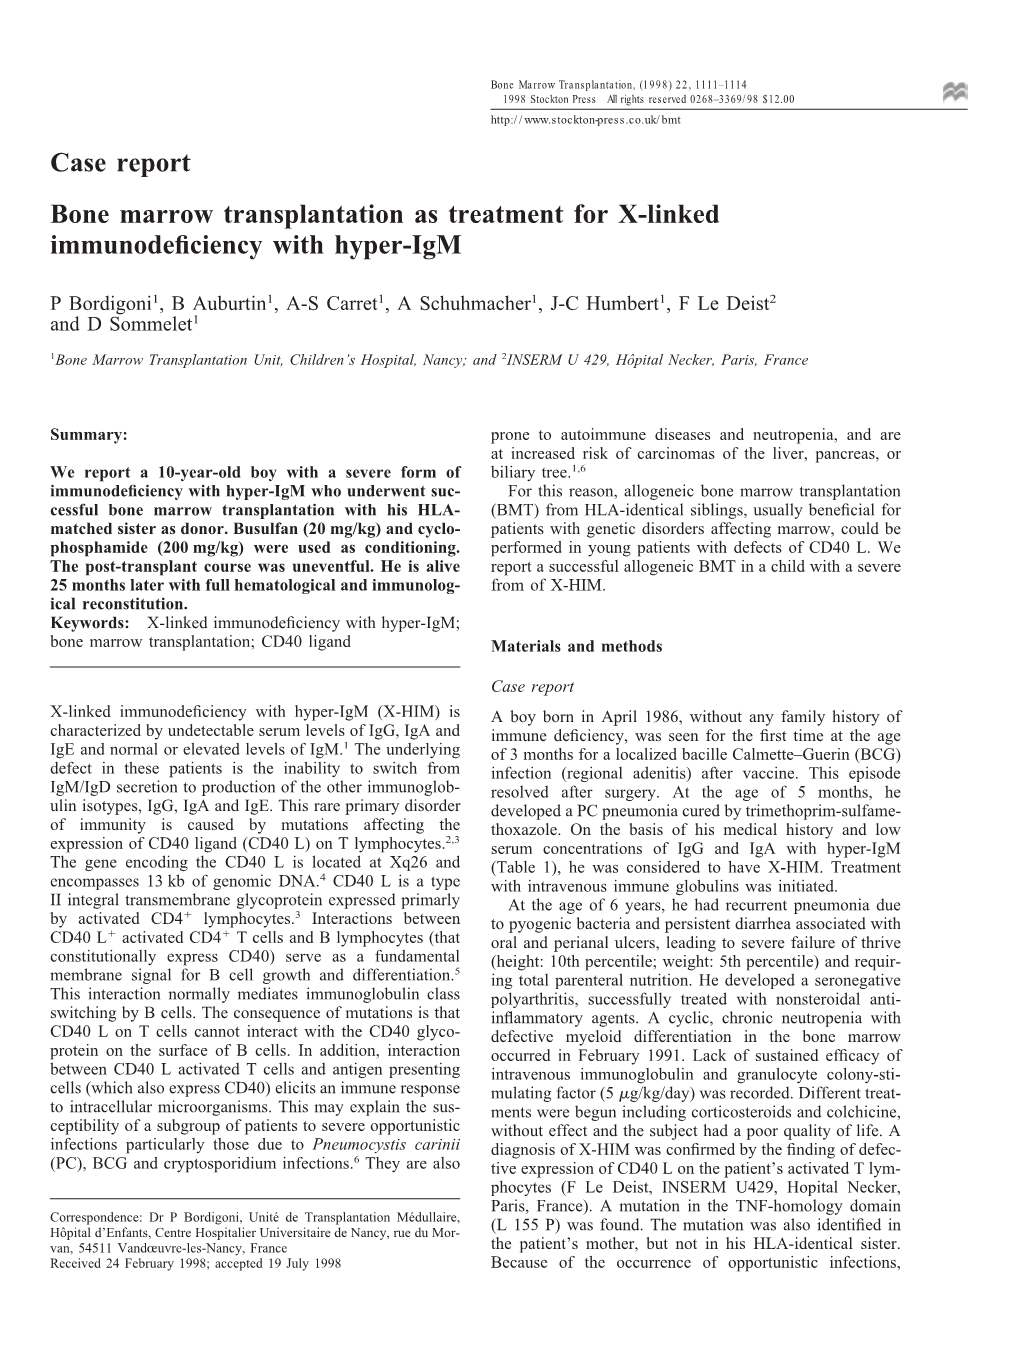 Case Report Bone Marrow Transplantation As Treatment for X-Linked Immunodeficiency with Hyper-Igm